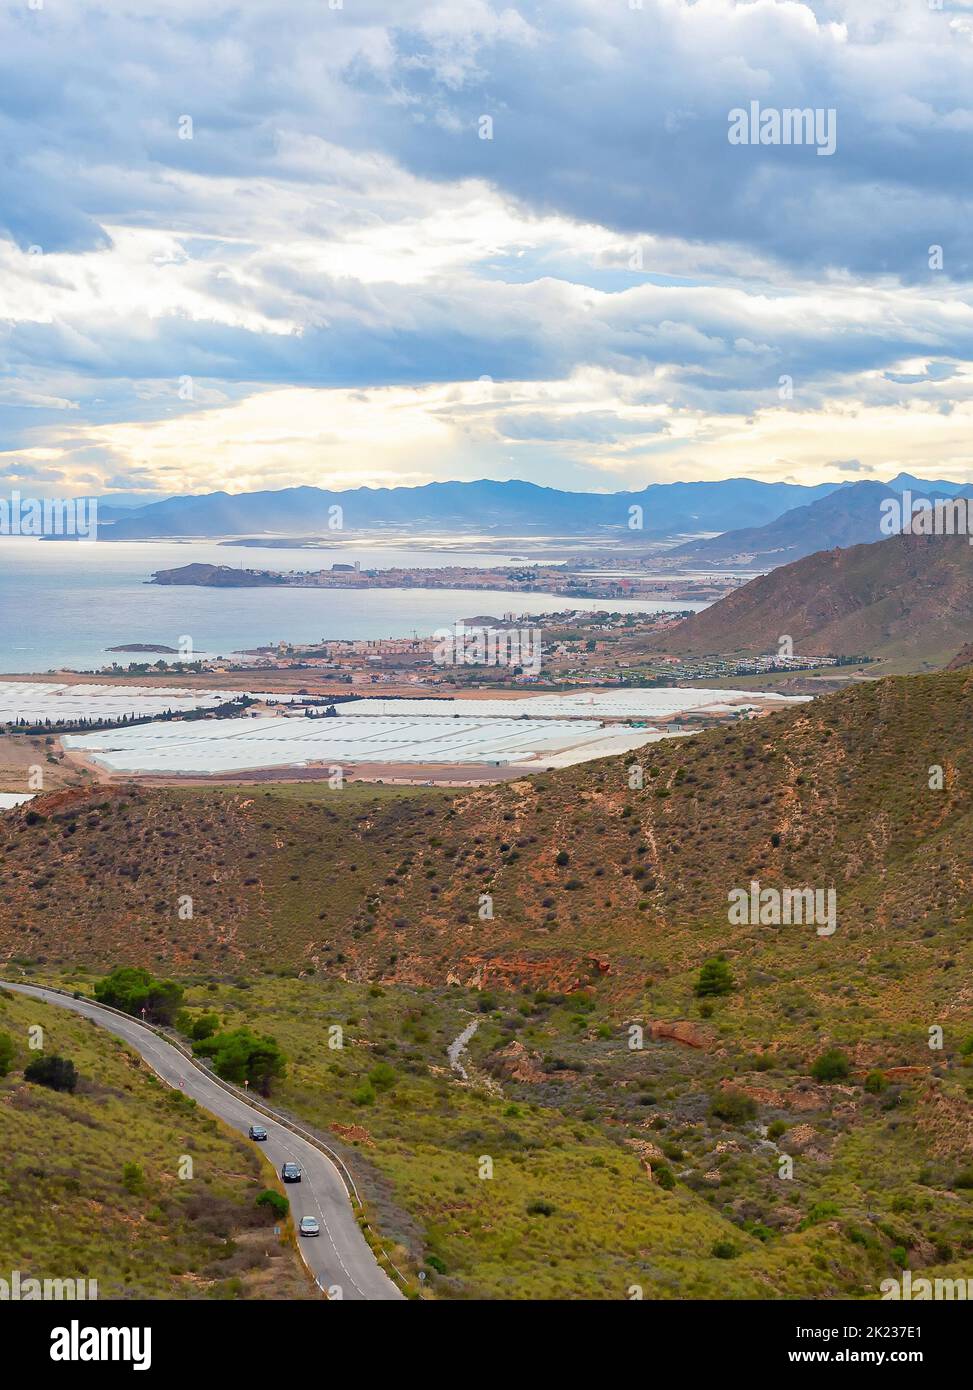 Landscape with mountains and village at seaside view under stormy sky, south of Spain Stock Photo